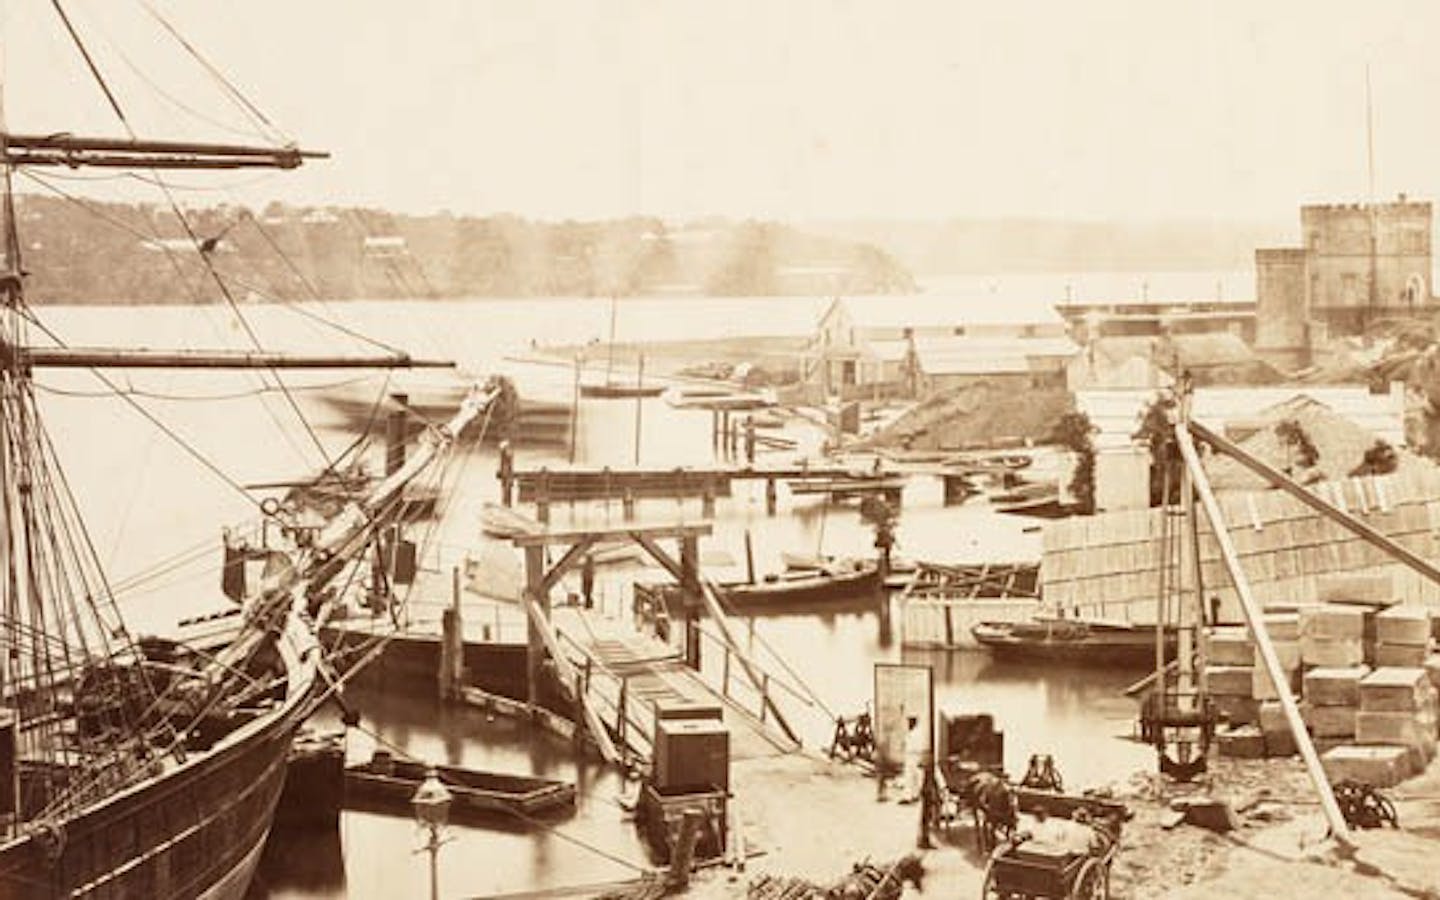 Government Boat Sheds in Circular Quay 1870s 2 C